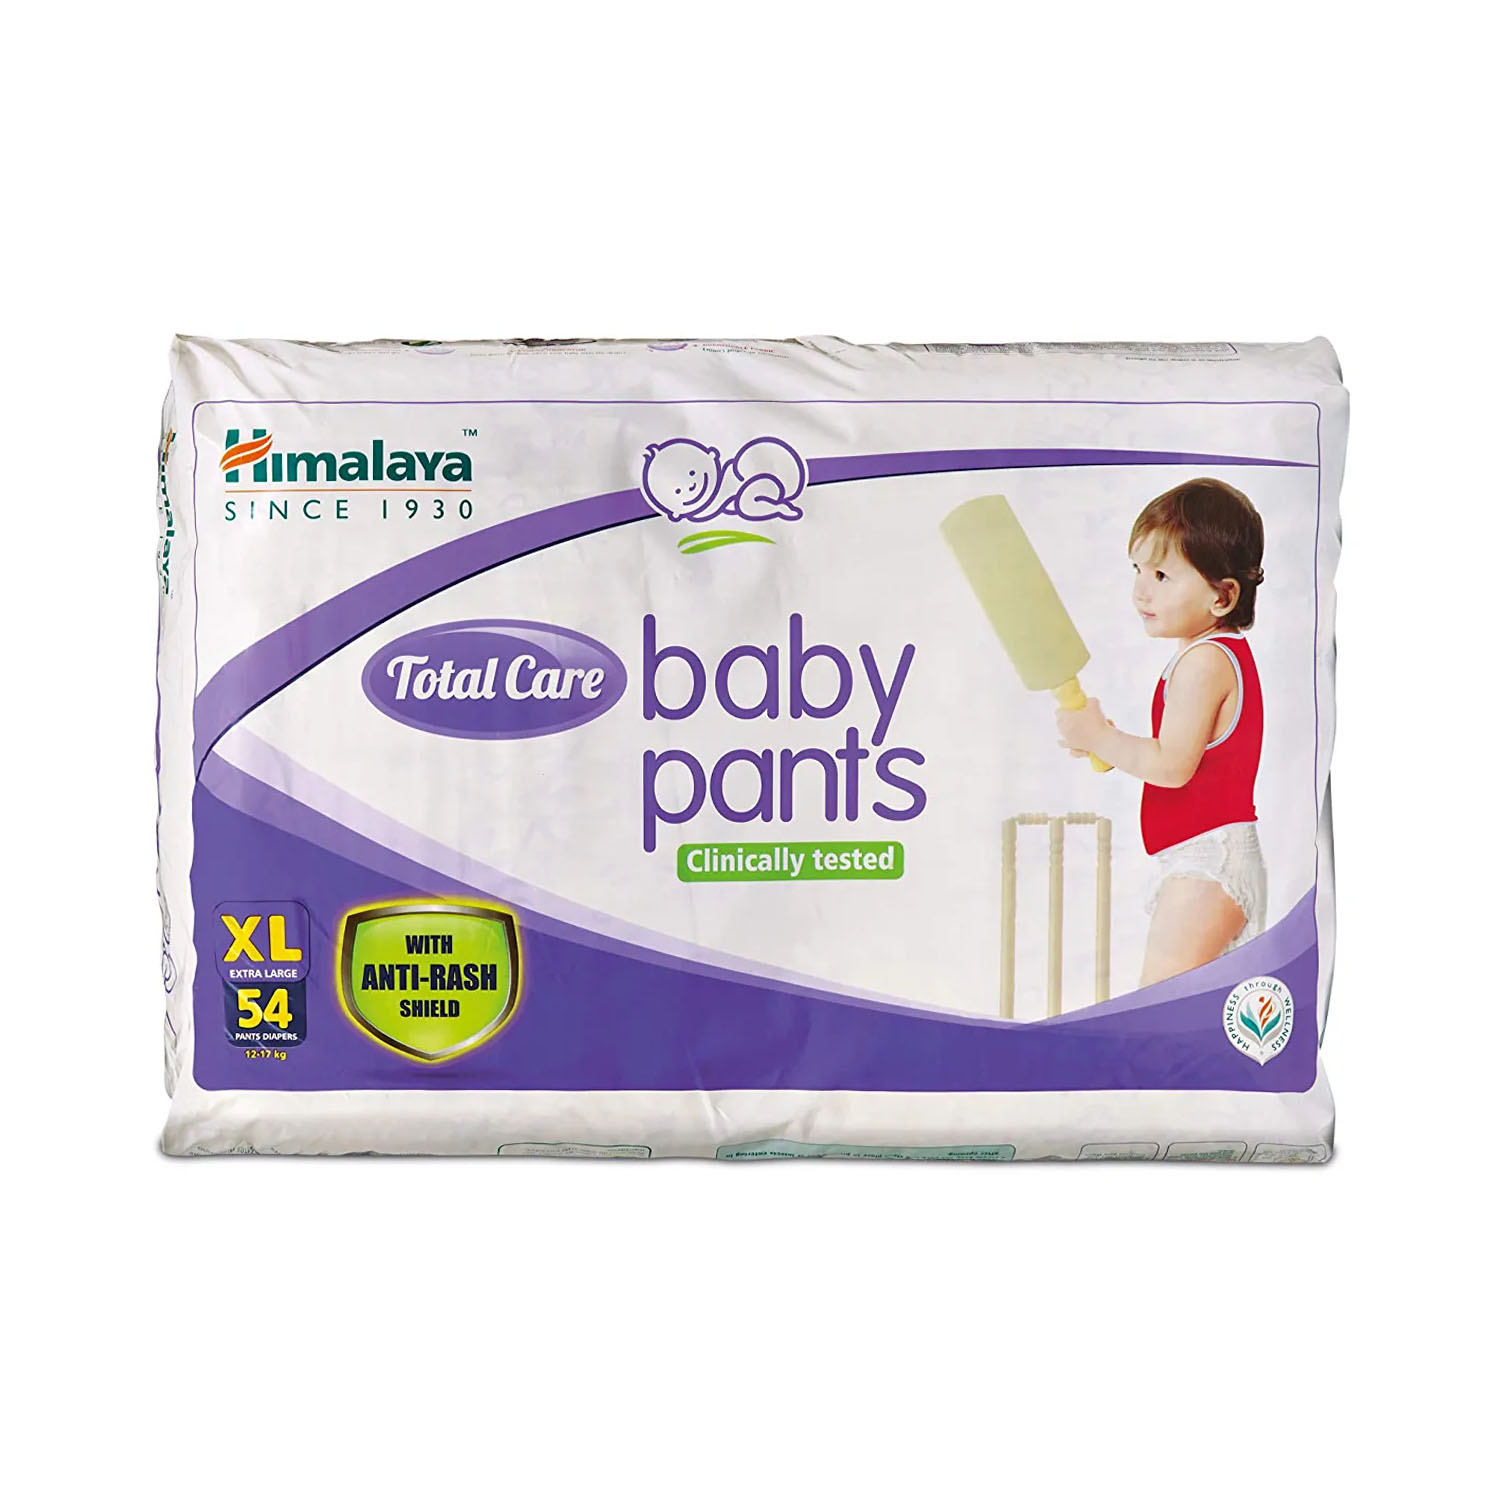 Sanjay Readymade Garments - Himalaya Total Care Baby Pants and Himalaya Baby  Diapers, with a protective anti-rash shield, ensures that your little one  stays dry and rash-free. While Himalaya Baby Diapers with